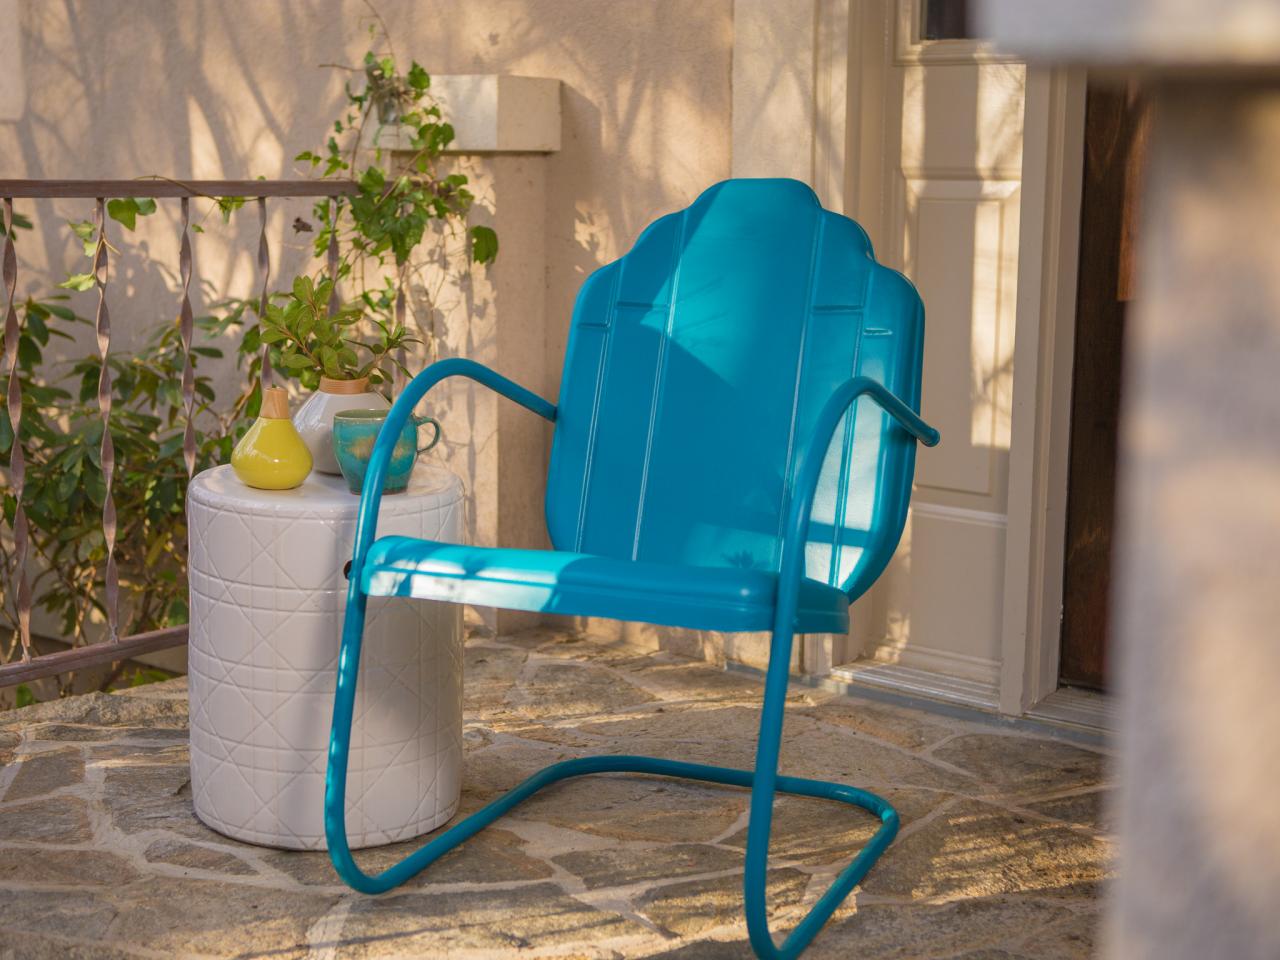 How To Paint An Outdoor Metal Chair, How To Remove Spray Paint From Patio Furniture